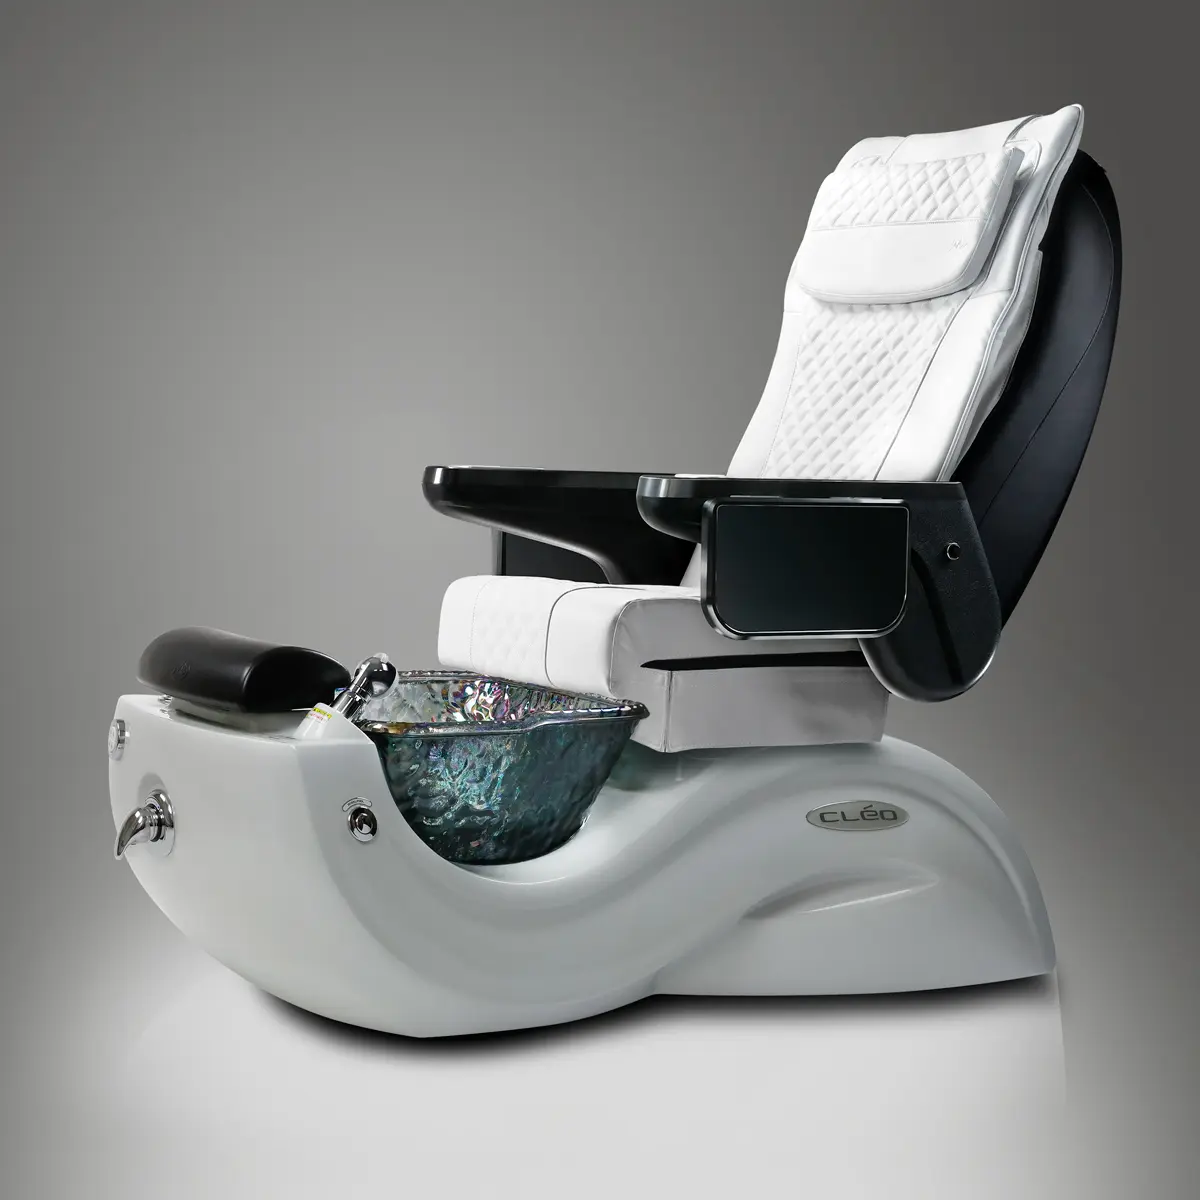 Cleo-G5-Gray-Nickle-White Spa Pedicure Chair - J & A Pedicure Spa Chair & Furniture Collection